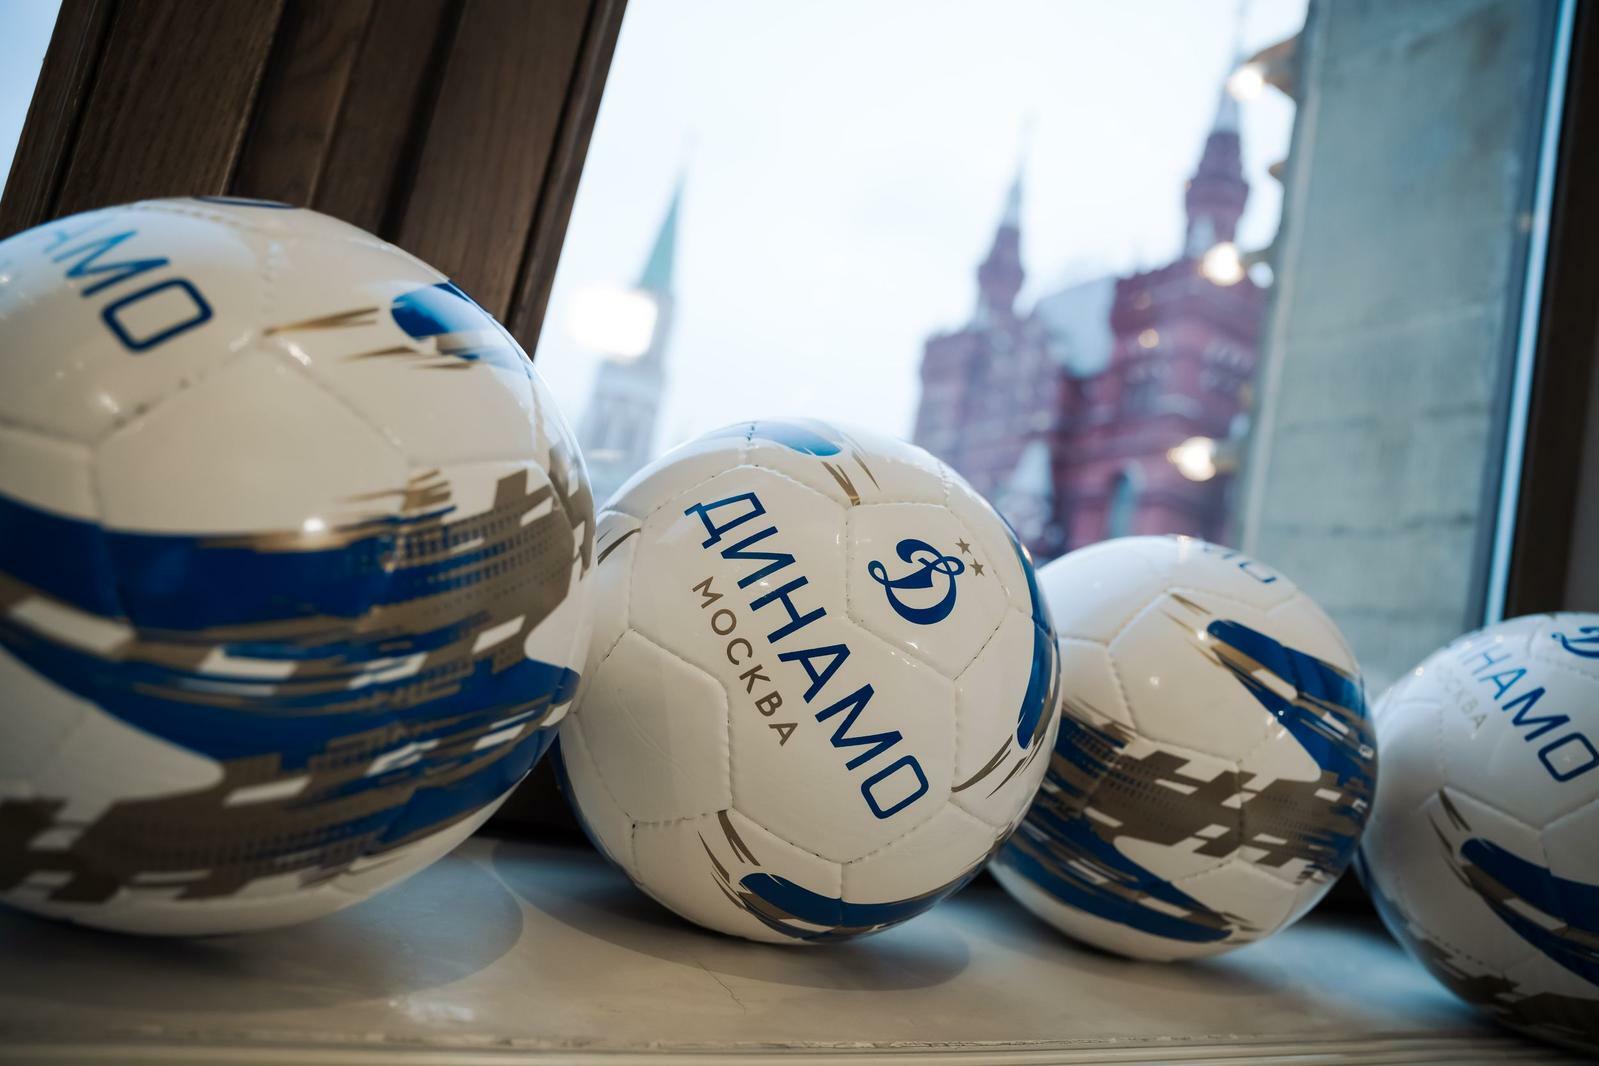 FC Dynamo Moscow News | Events at BetBoom Dynamo House this week. Official Dynamo club website.